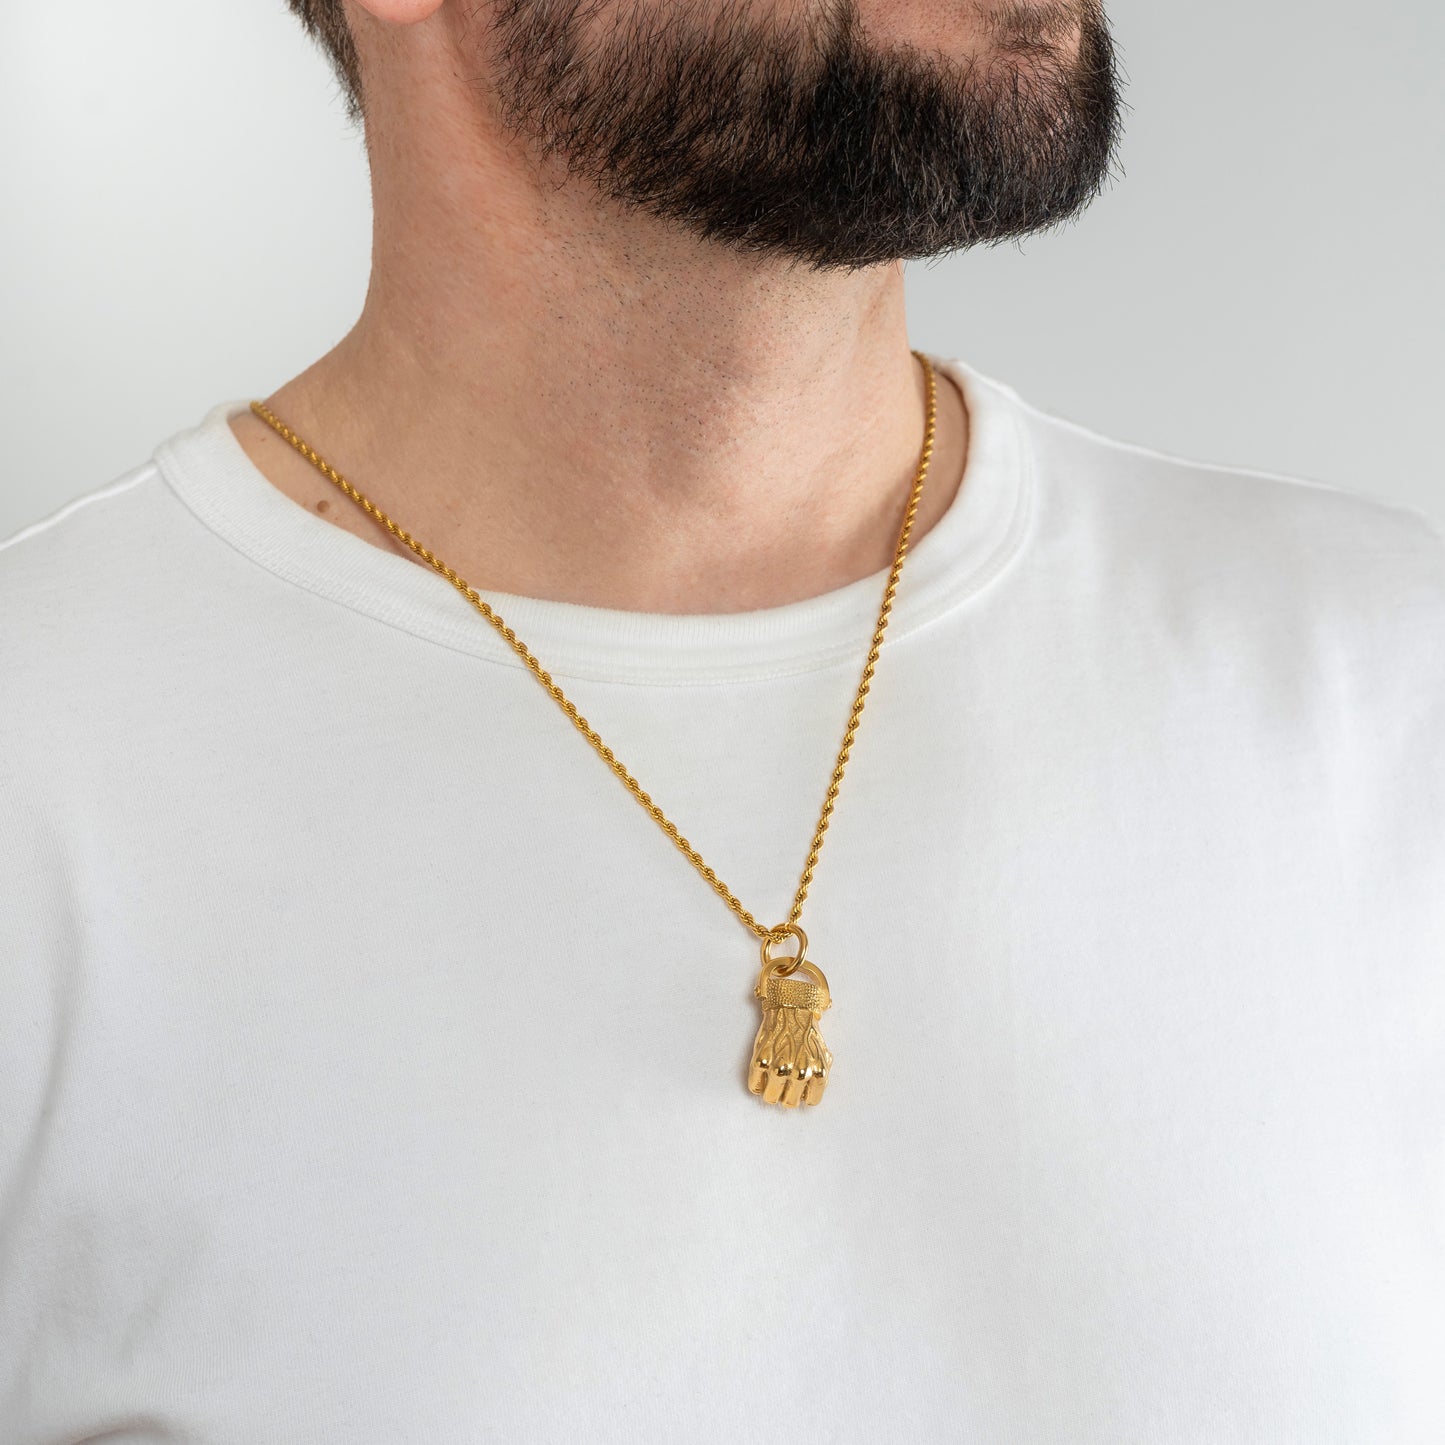 A male model in a white t-shirt wearing a Fist Gold Pendant with a Gold Rope chain 22 inches.